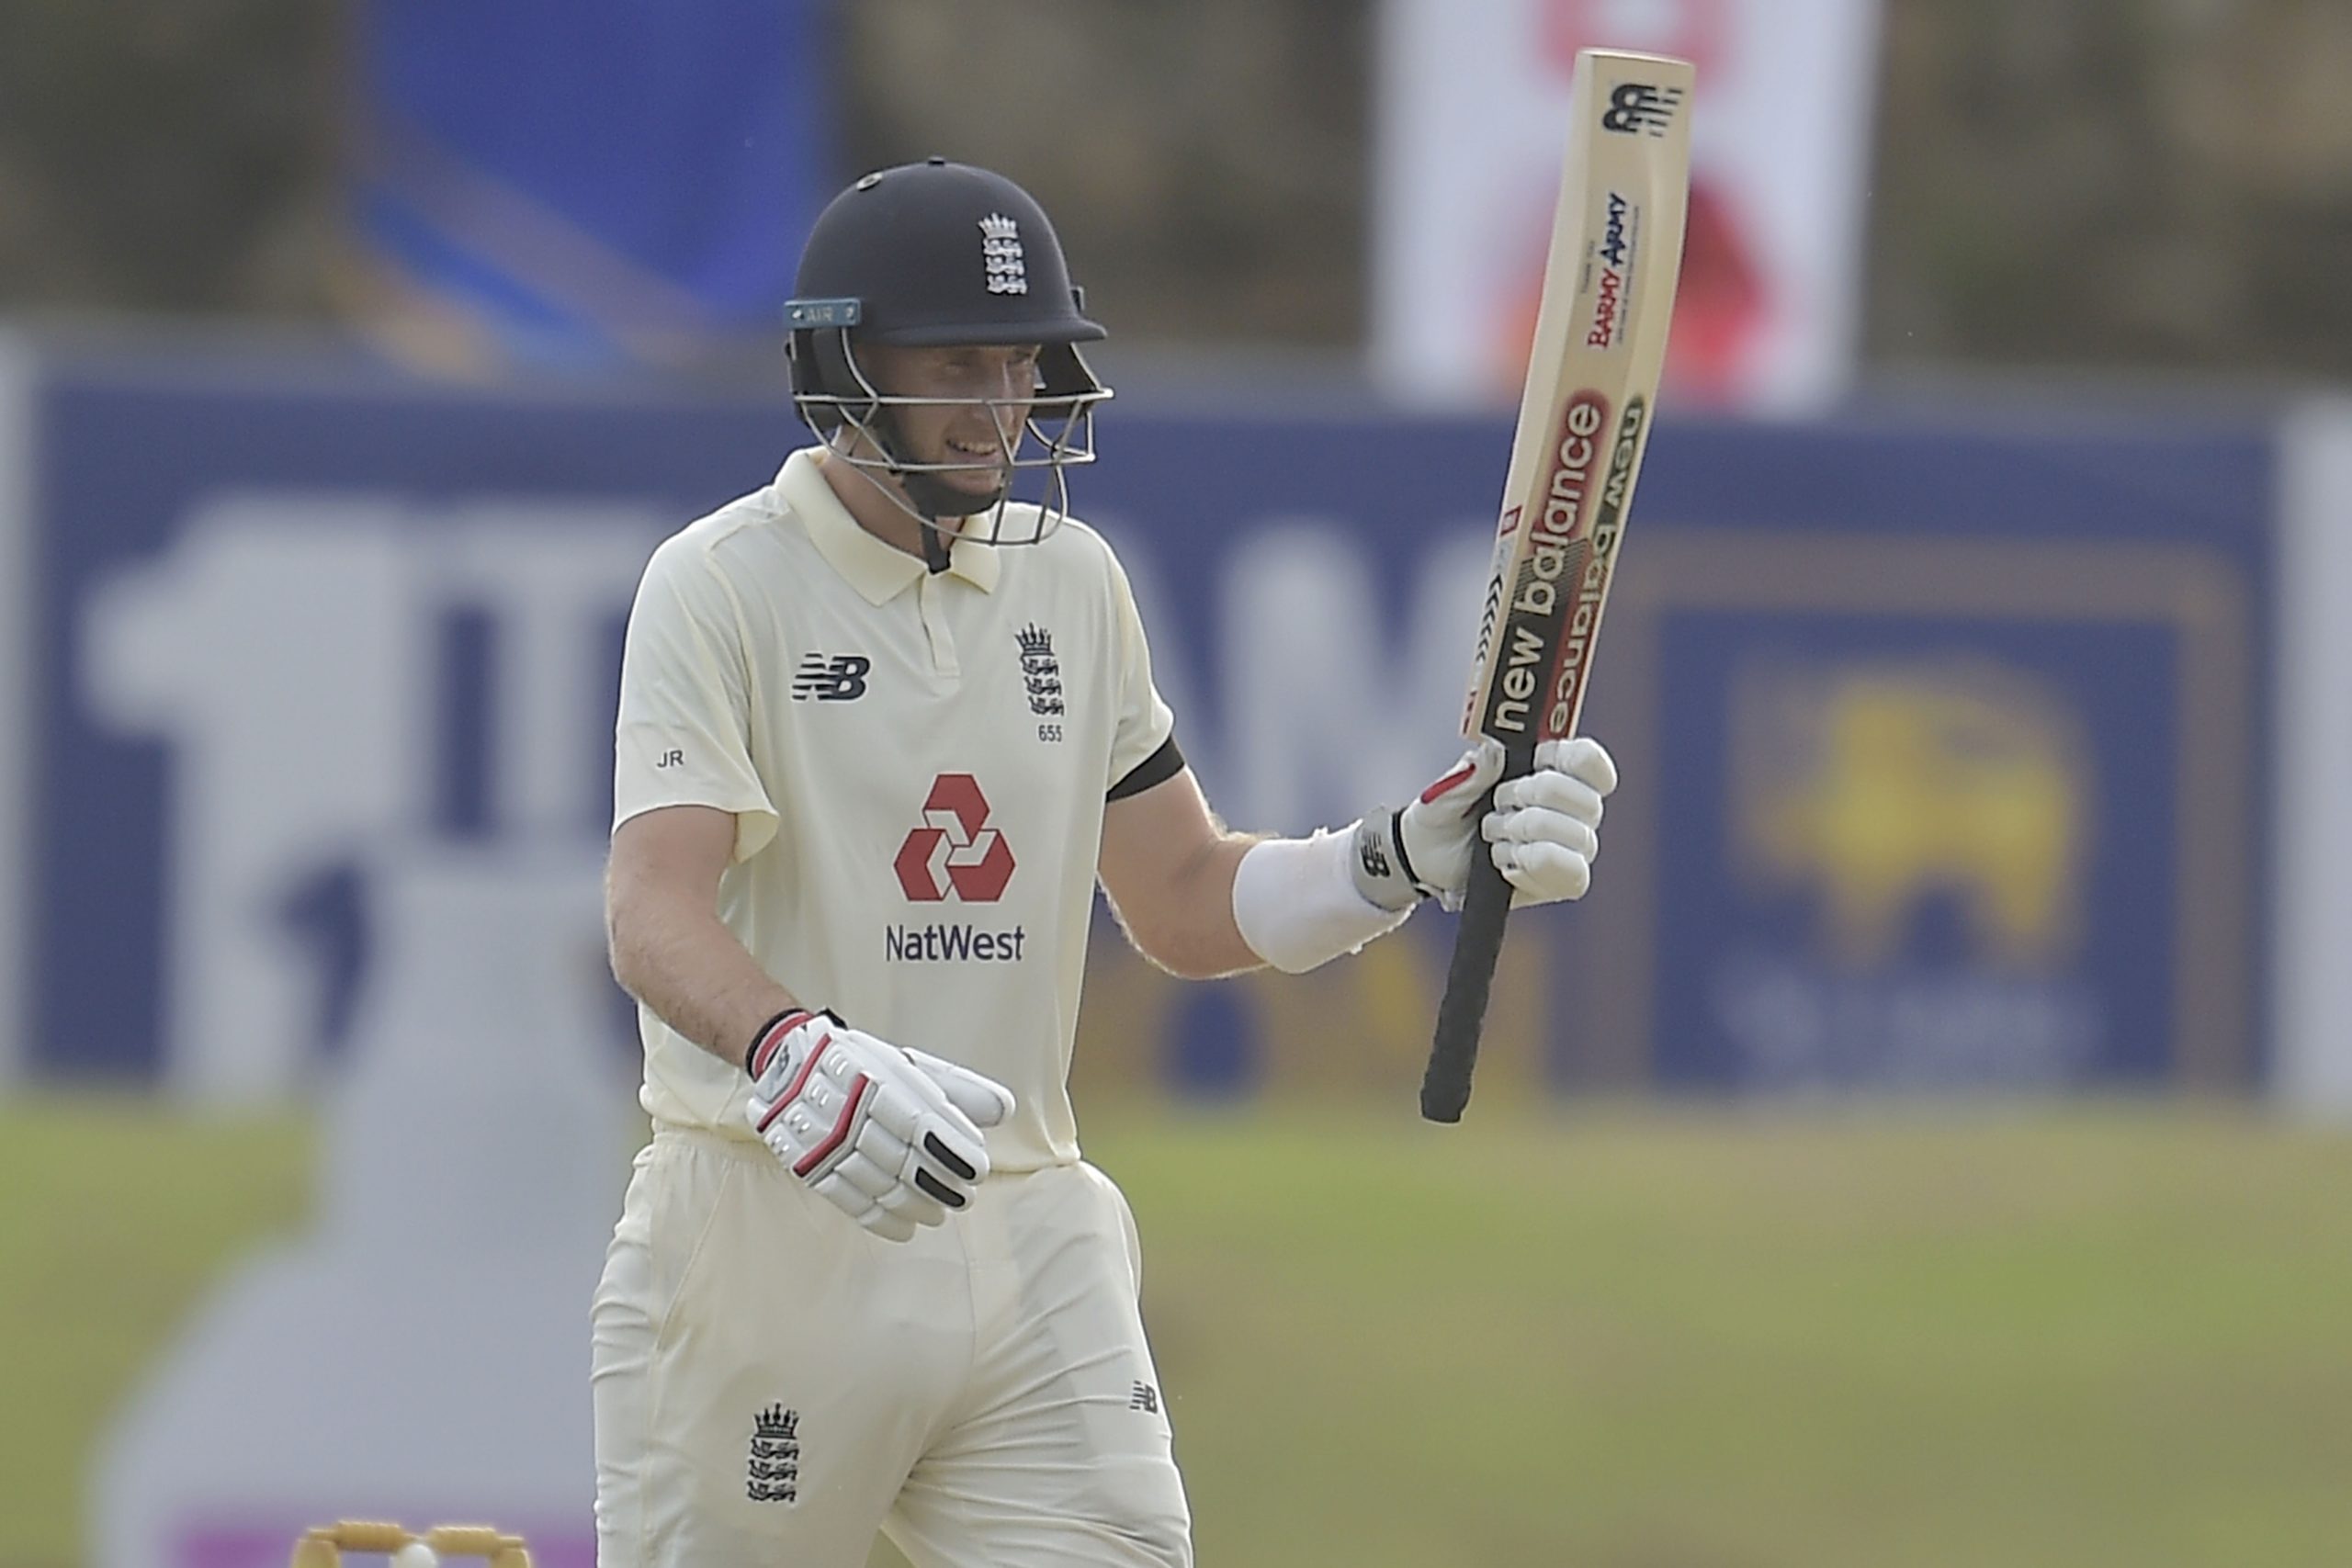 Sri Lanka’s batting miscarriage continues – 135 all out; England 127/2